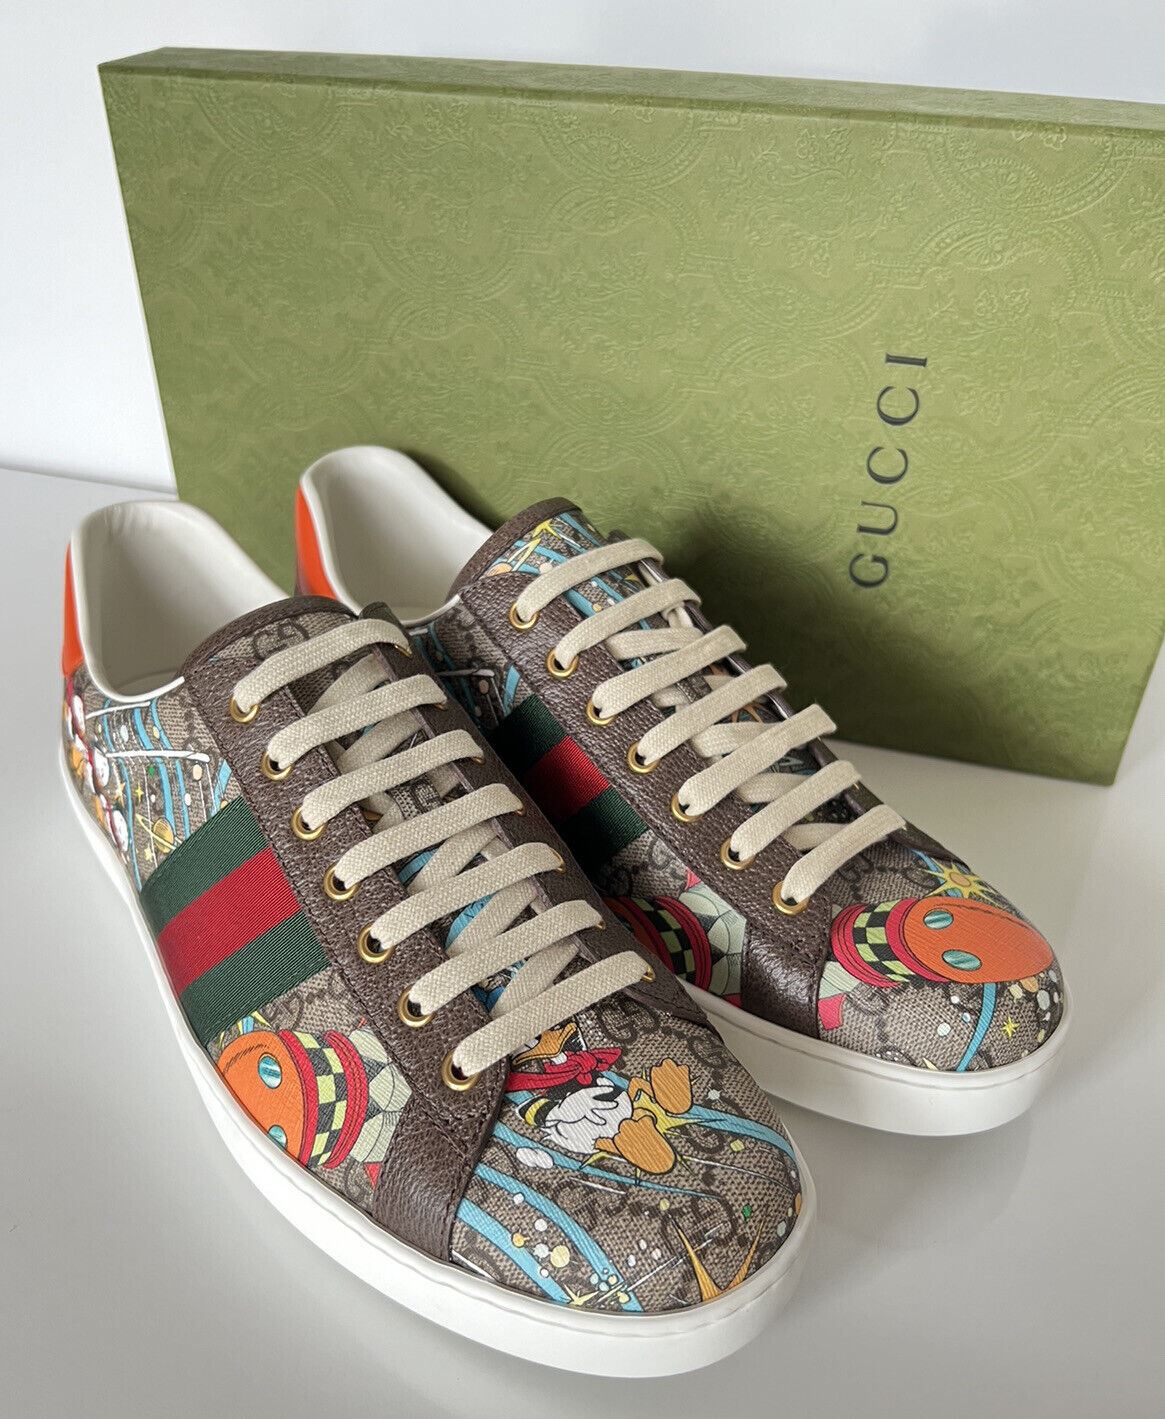 NIB Gucci Men’s Donald Duck Sneakers 10.5 US (Gucci 10) Made in Italy 647950